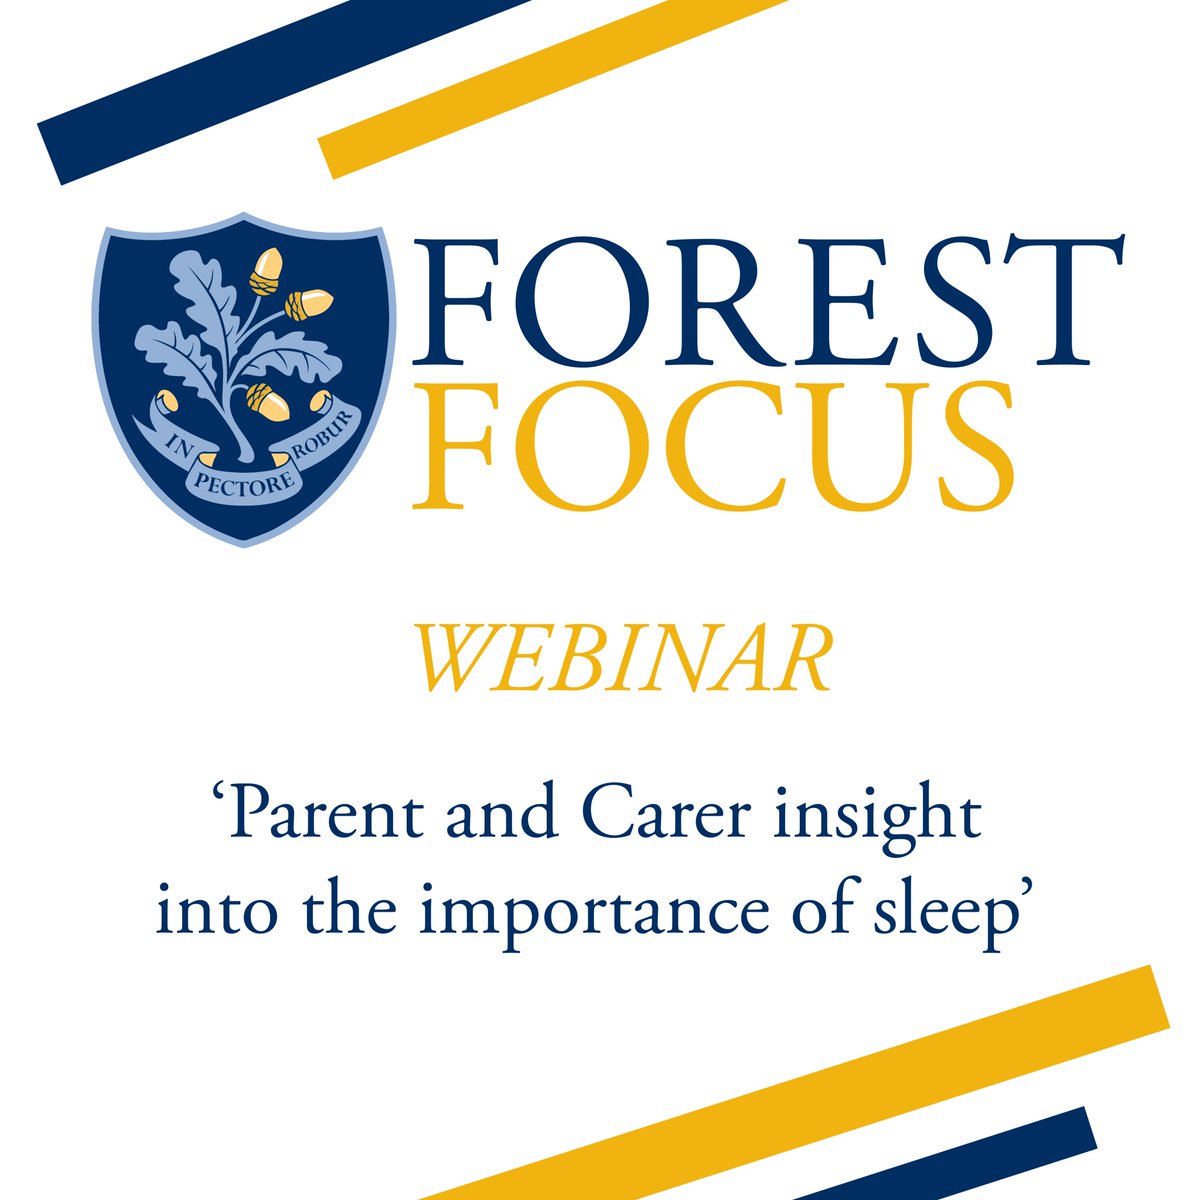 Reminder for today's webinar at 6pm on 'Parent and Carer insight into the importance of sleep': youtube.com/live/PeJ6chEhk… Subscribe to our Forest School YouTube channel so you don't miss out on the live stream!😊 #forestfocus